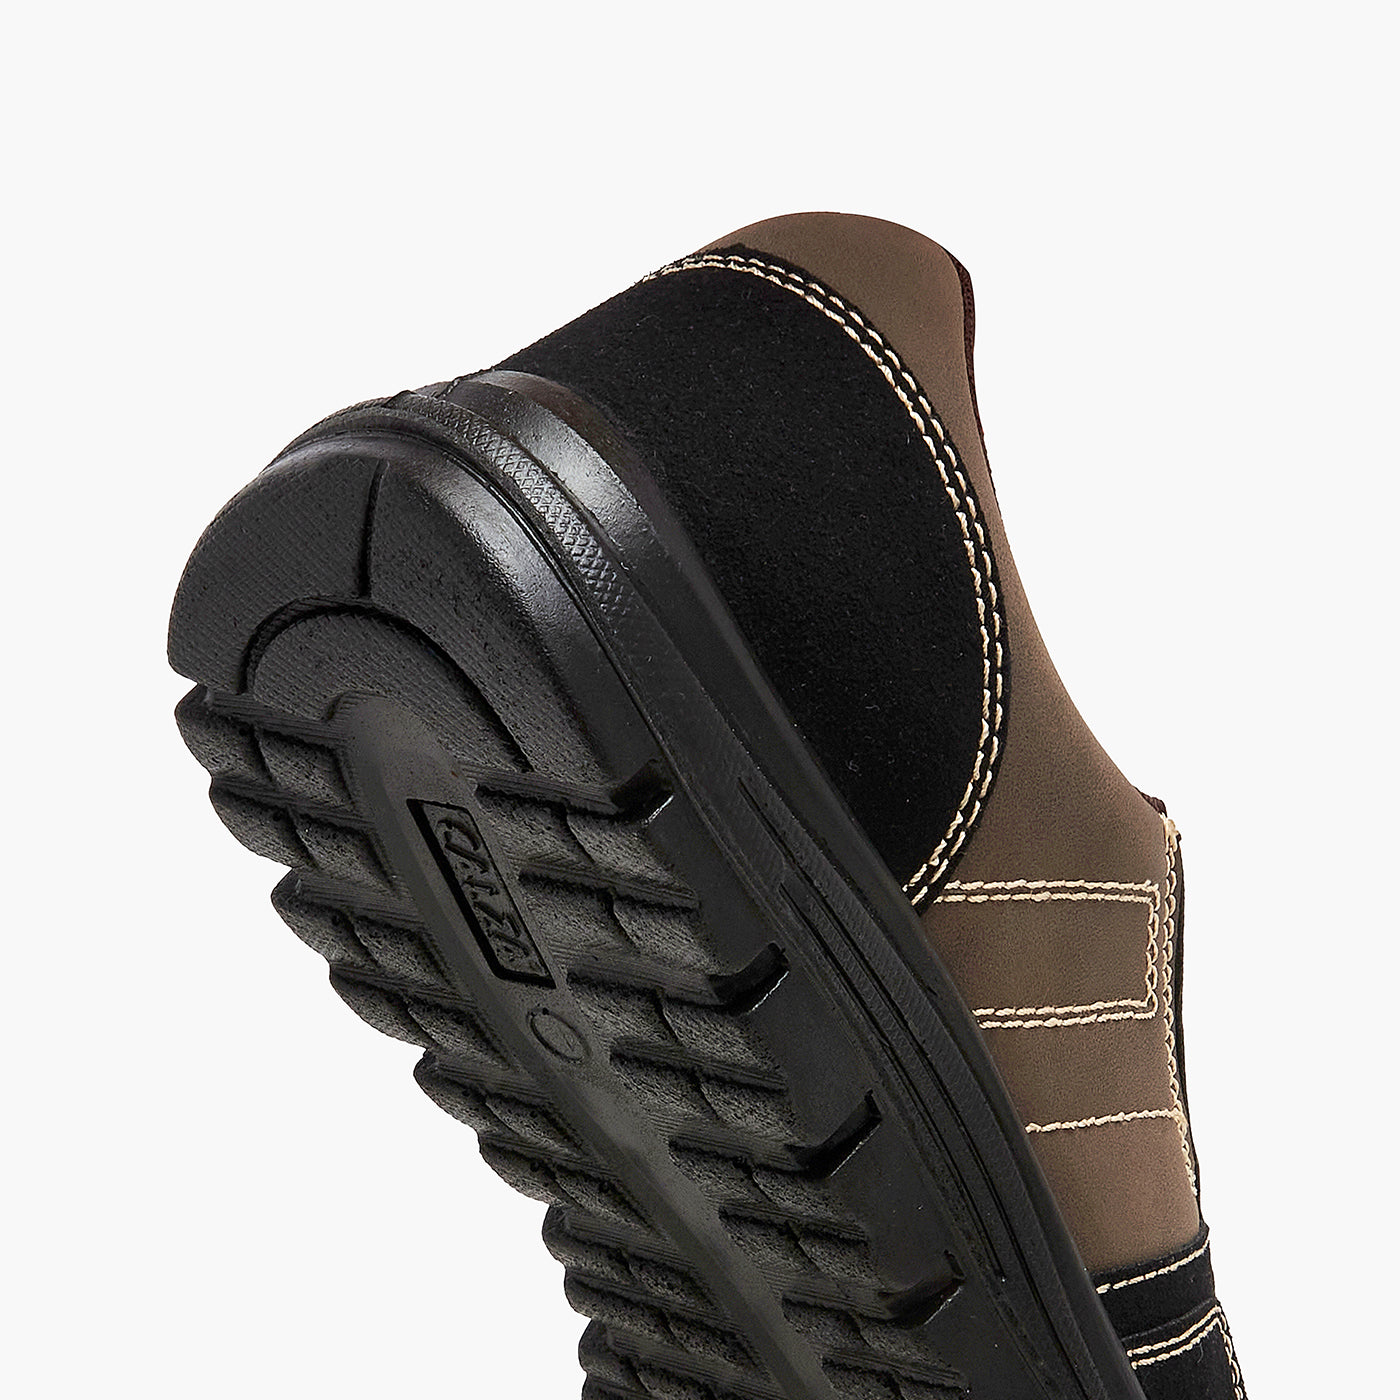 Men's Rugged Outdoor Shoes